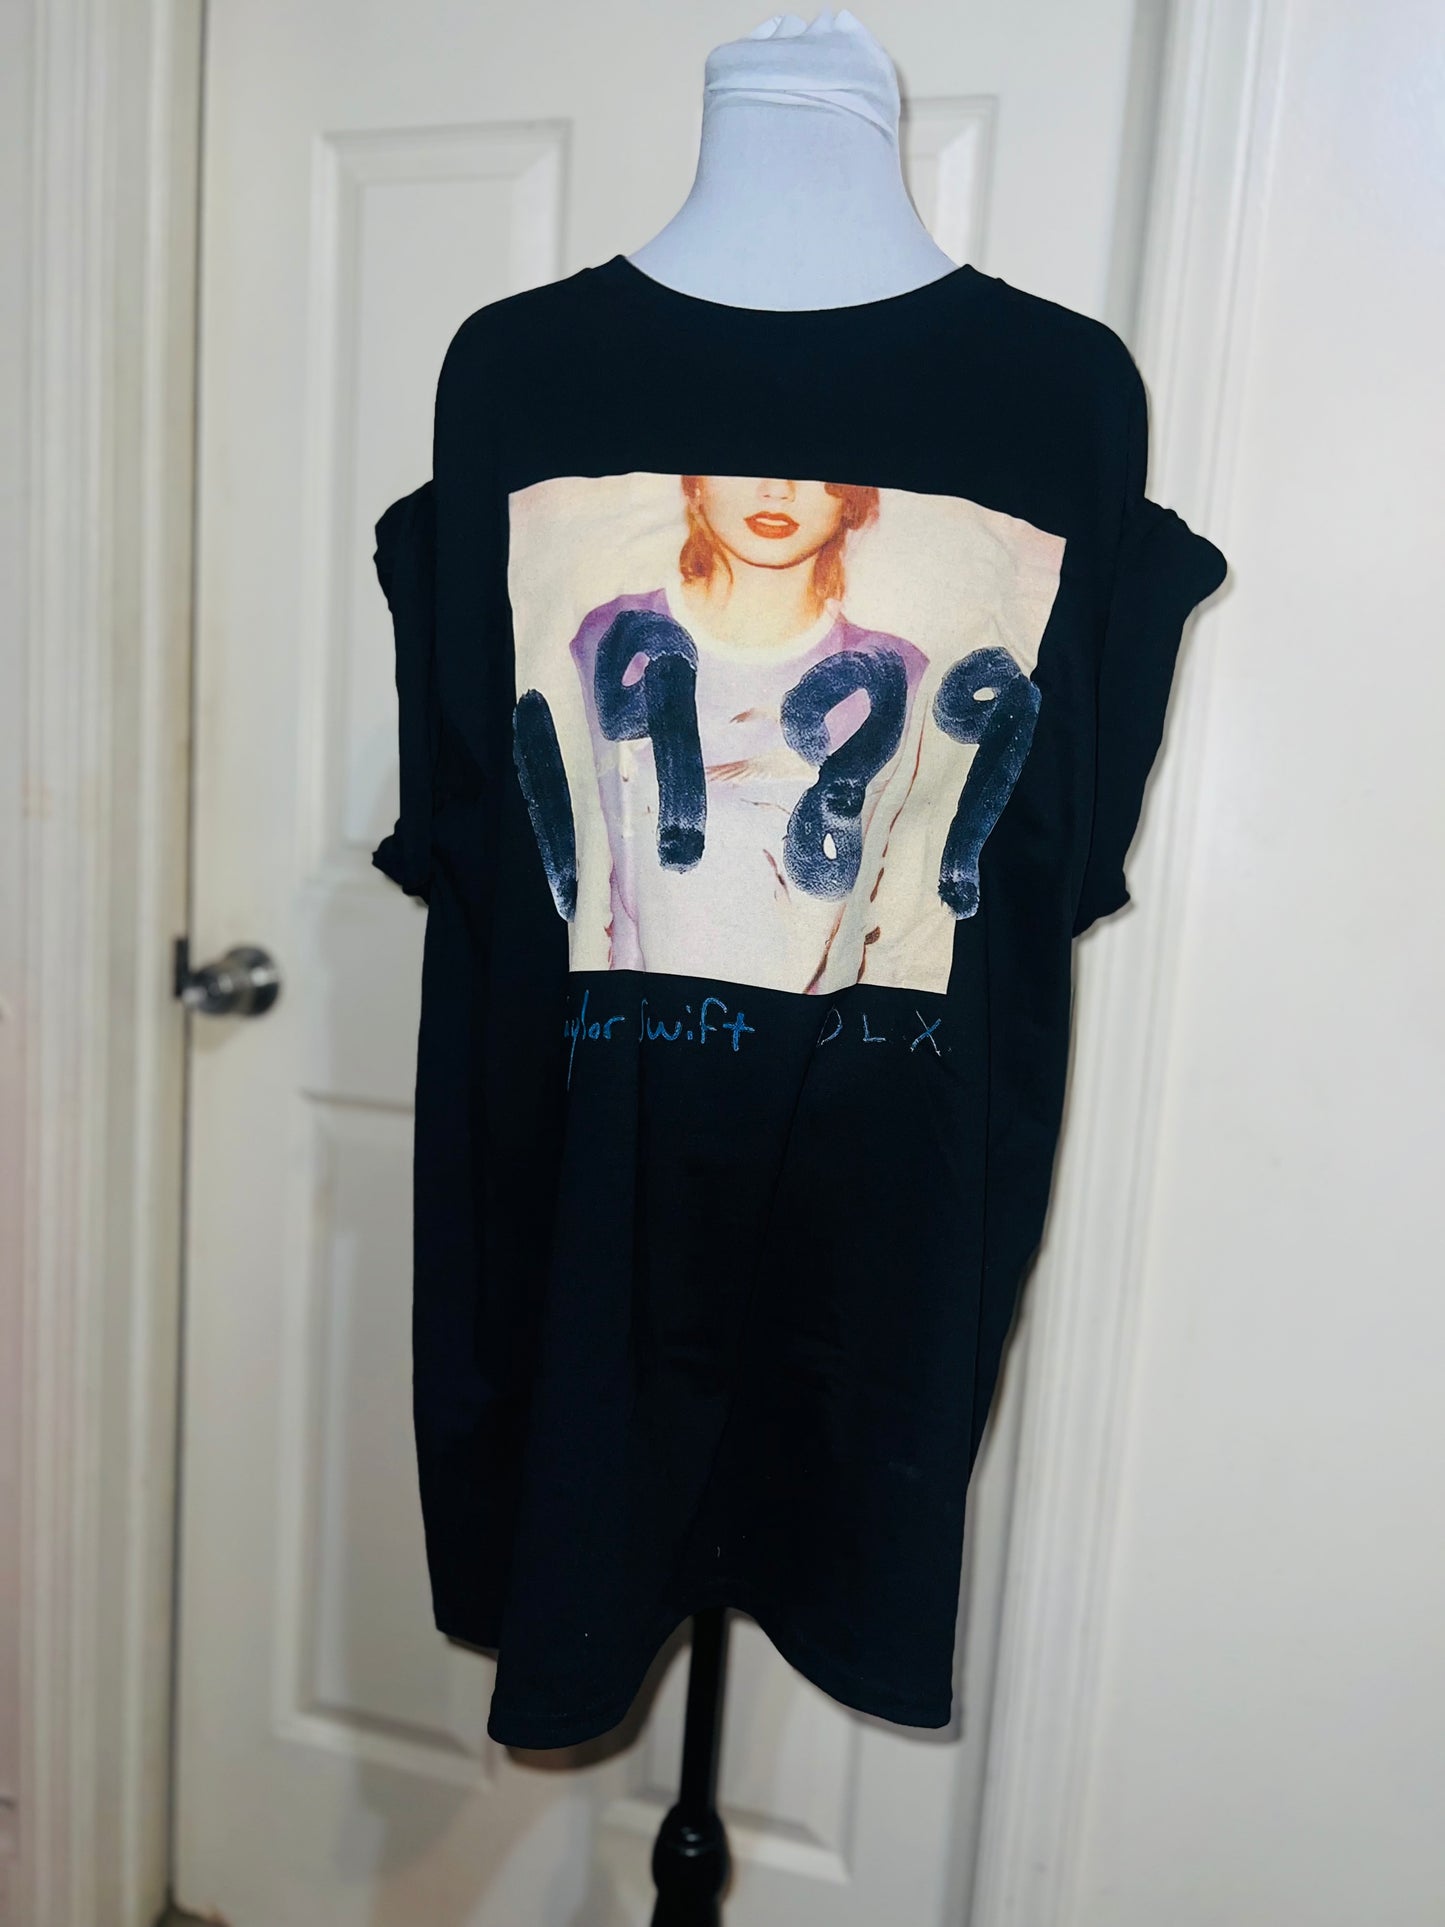 Taylor Swift 1989 Oversized Distressed Tee